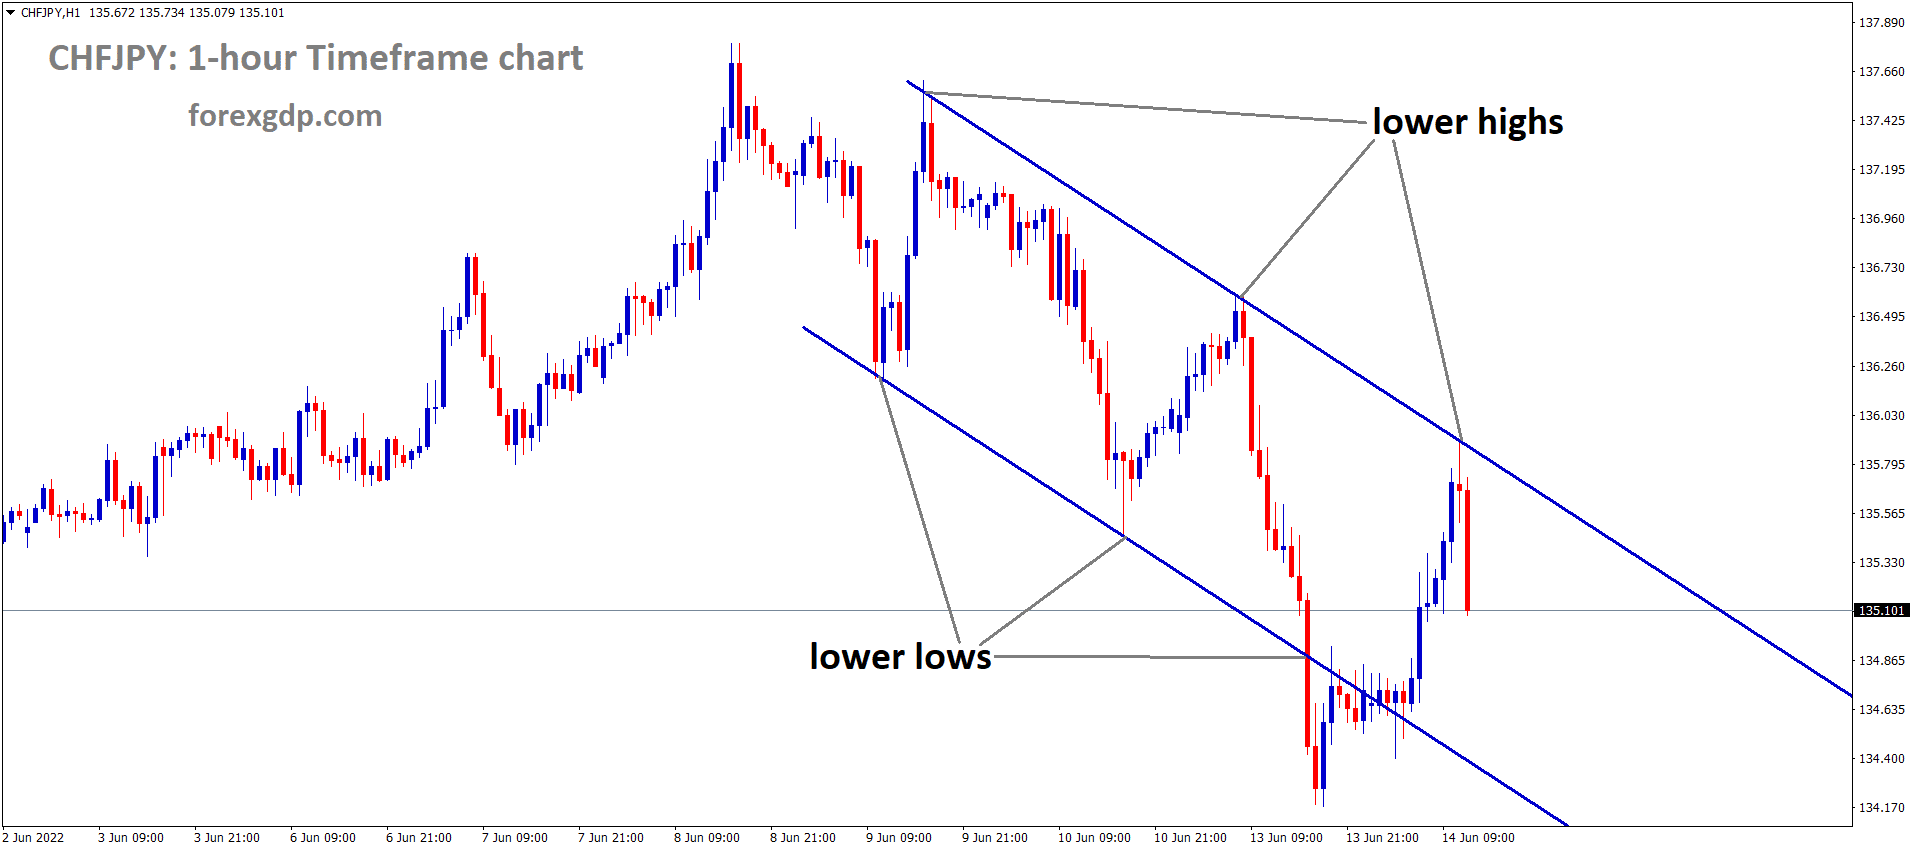 CHFJPY is moving in the Descending channel and the Market has fallen from the lower high area of the channel